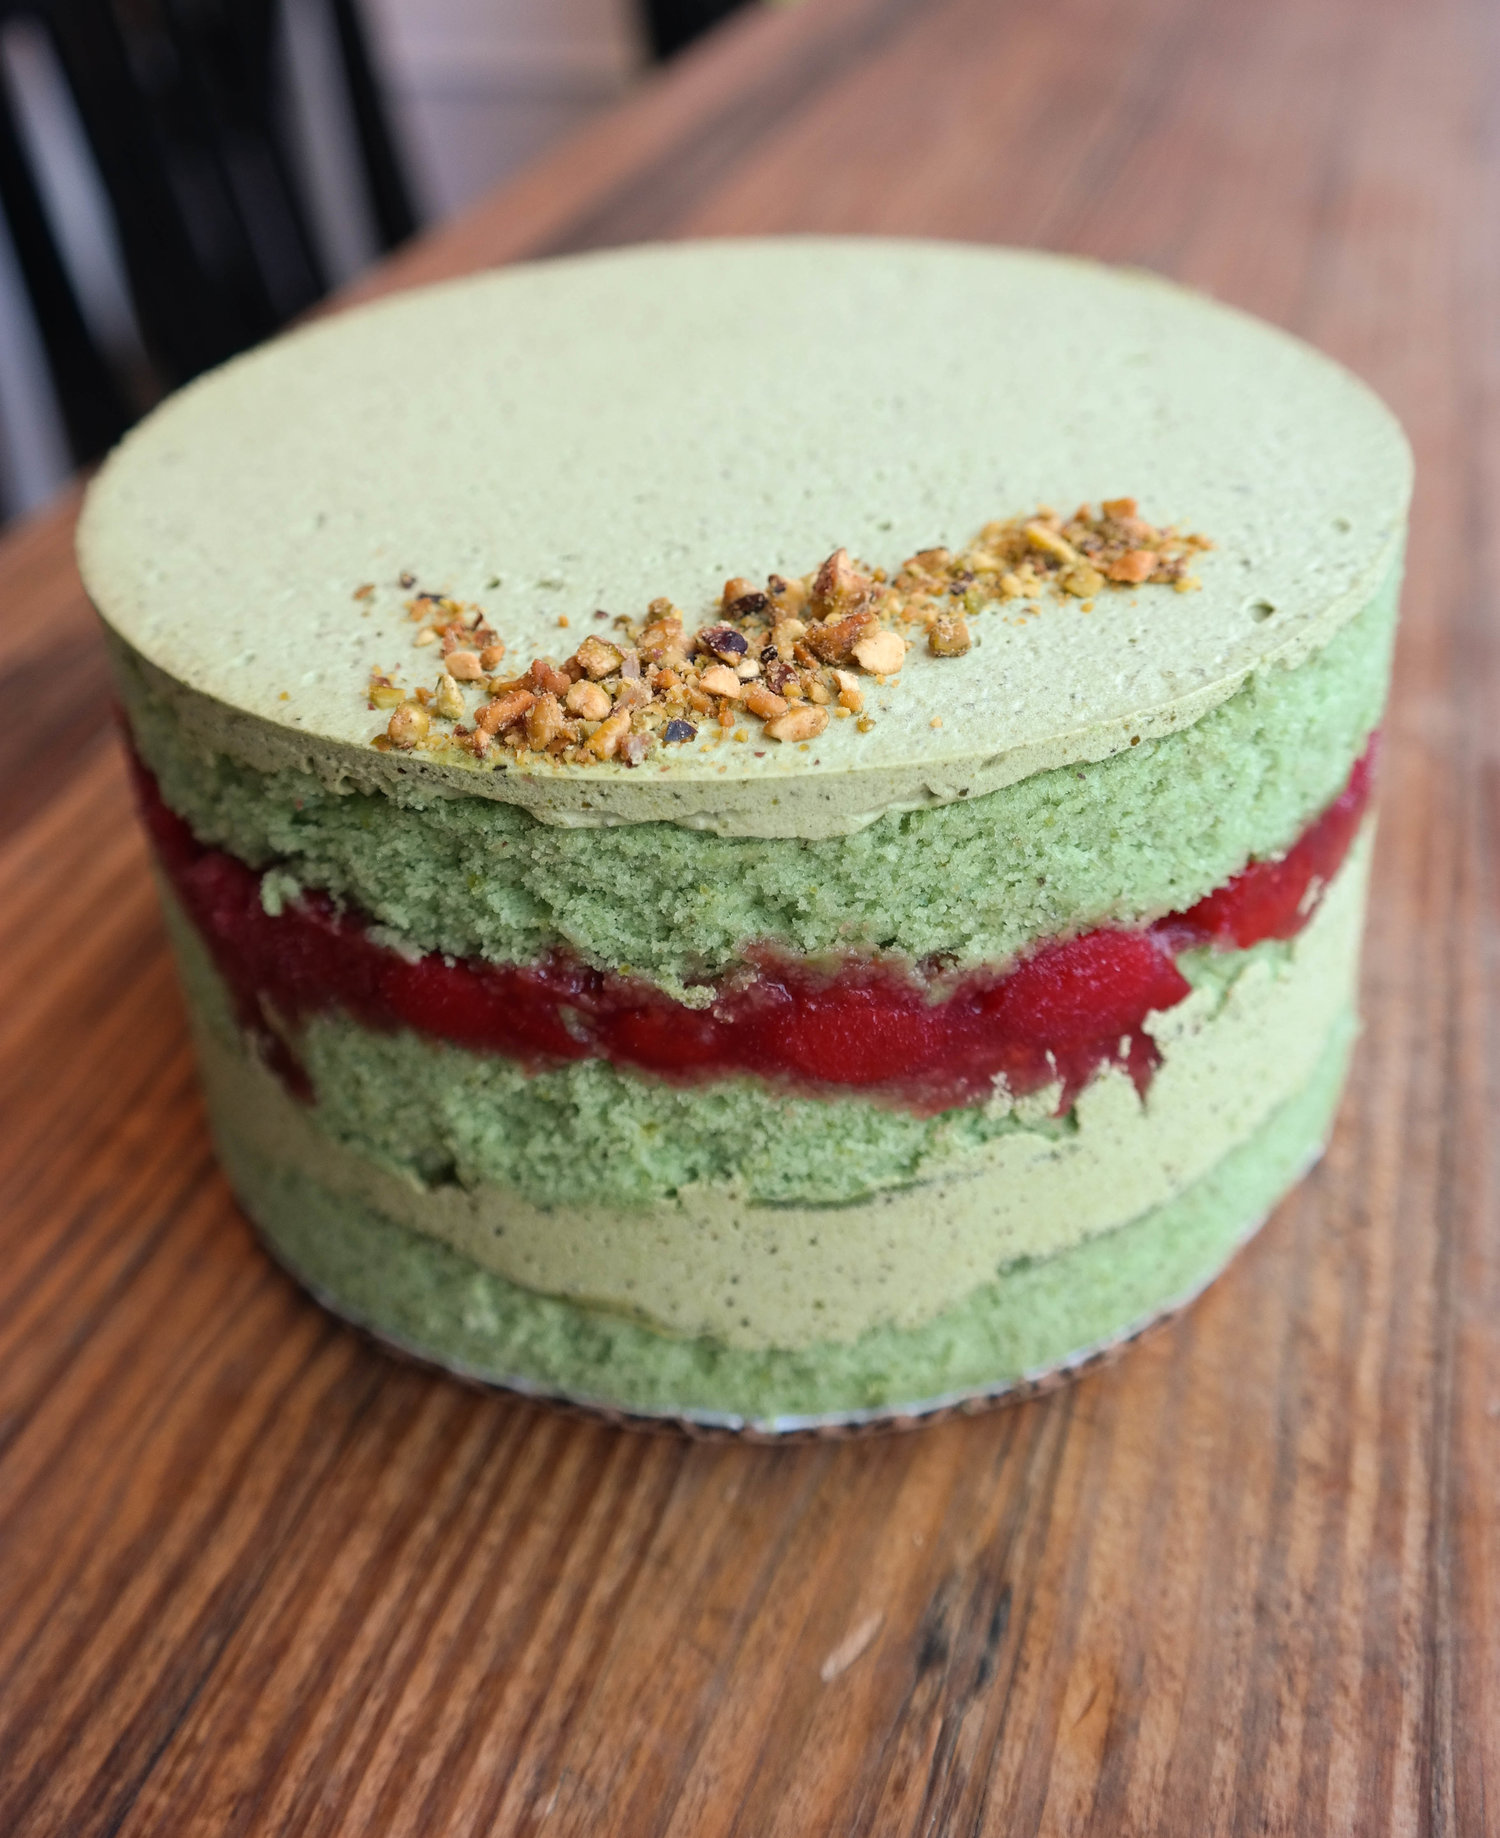   Pistachio Cake - pistachio cake layered with pistachio buttercream and cherry compote, sprinkled throughout with toasted pistachios 